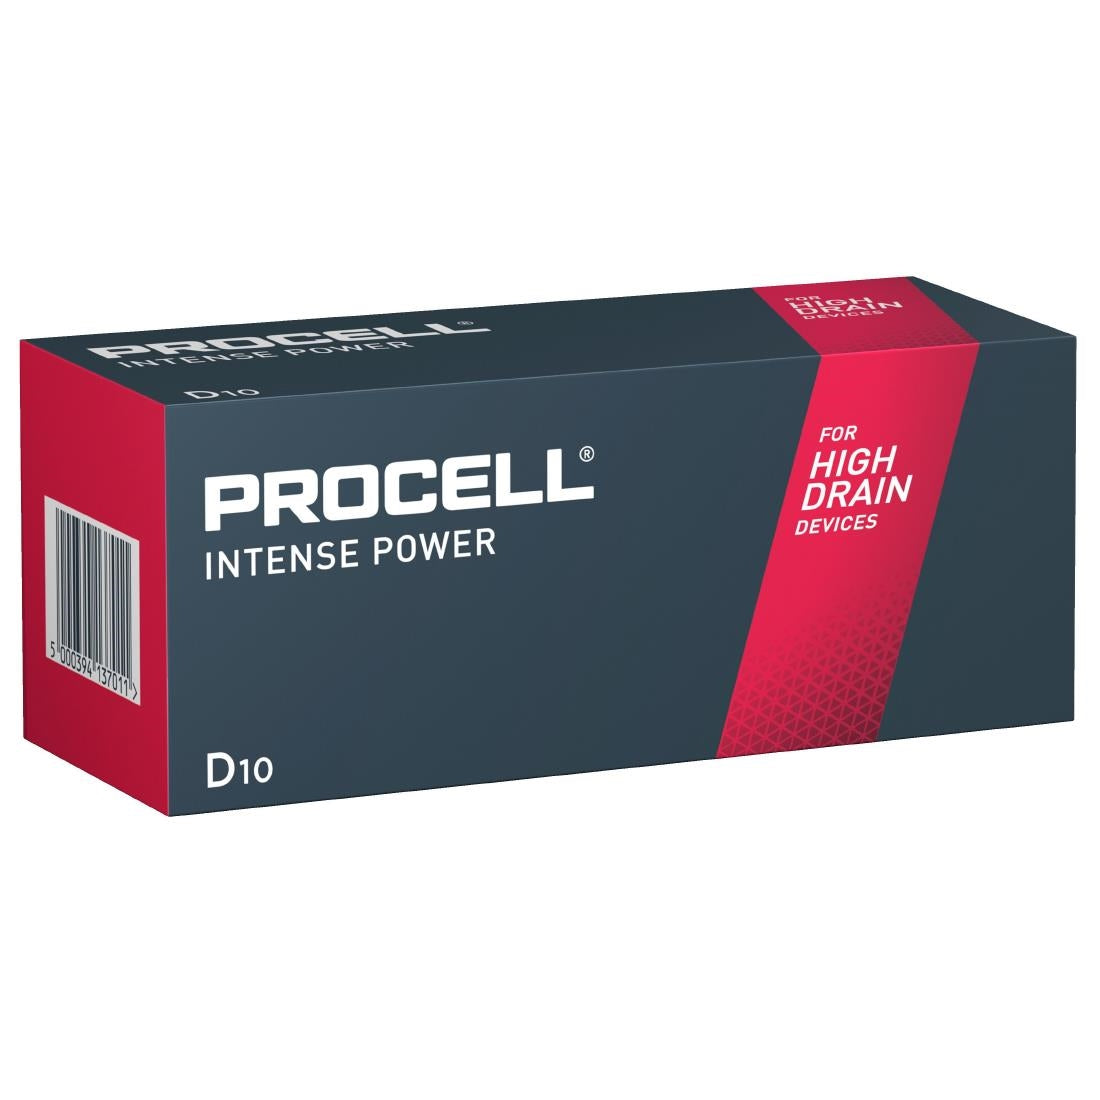 FS724 Duracell Procell Intense D Battery (Pack of 10) JD Catering Equipment Solutions Ltd